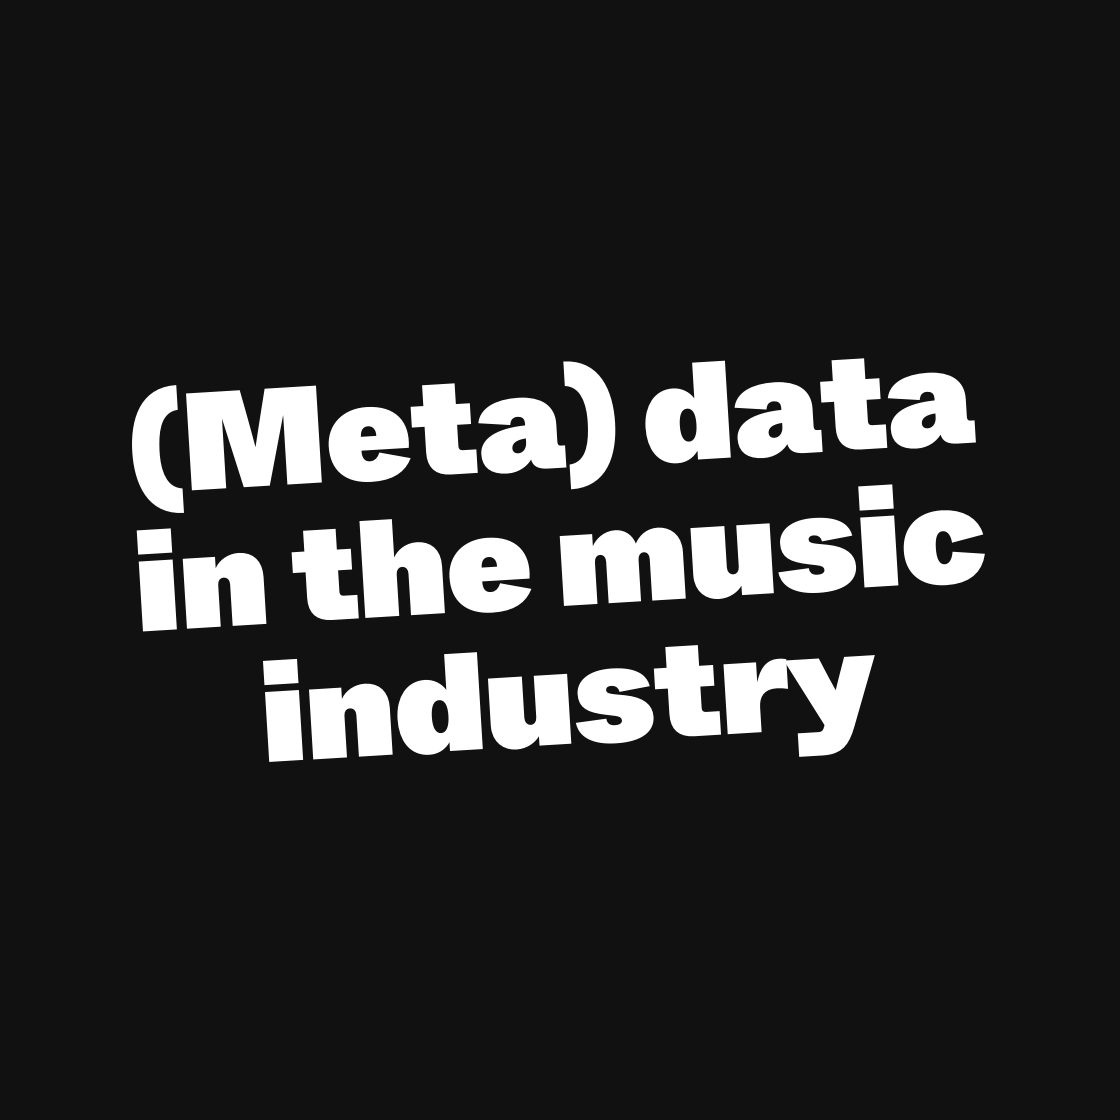 (Meta) data in the music industry